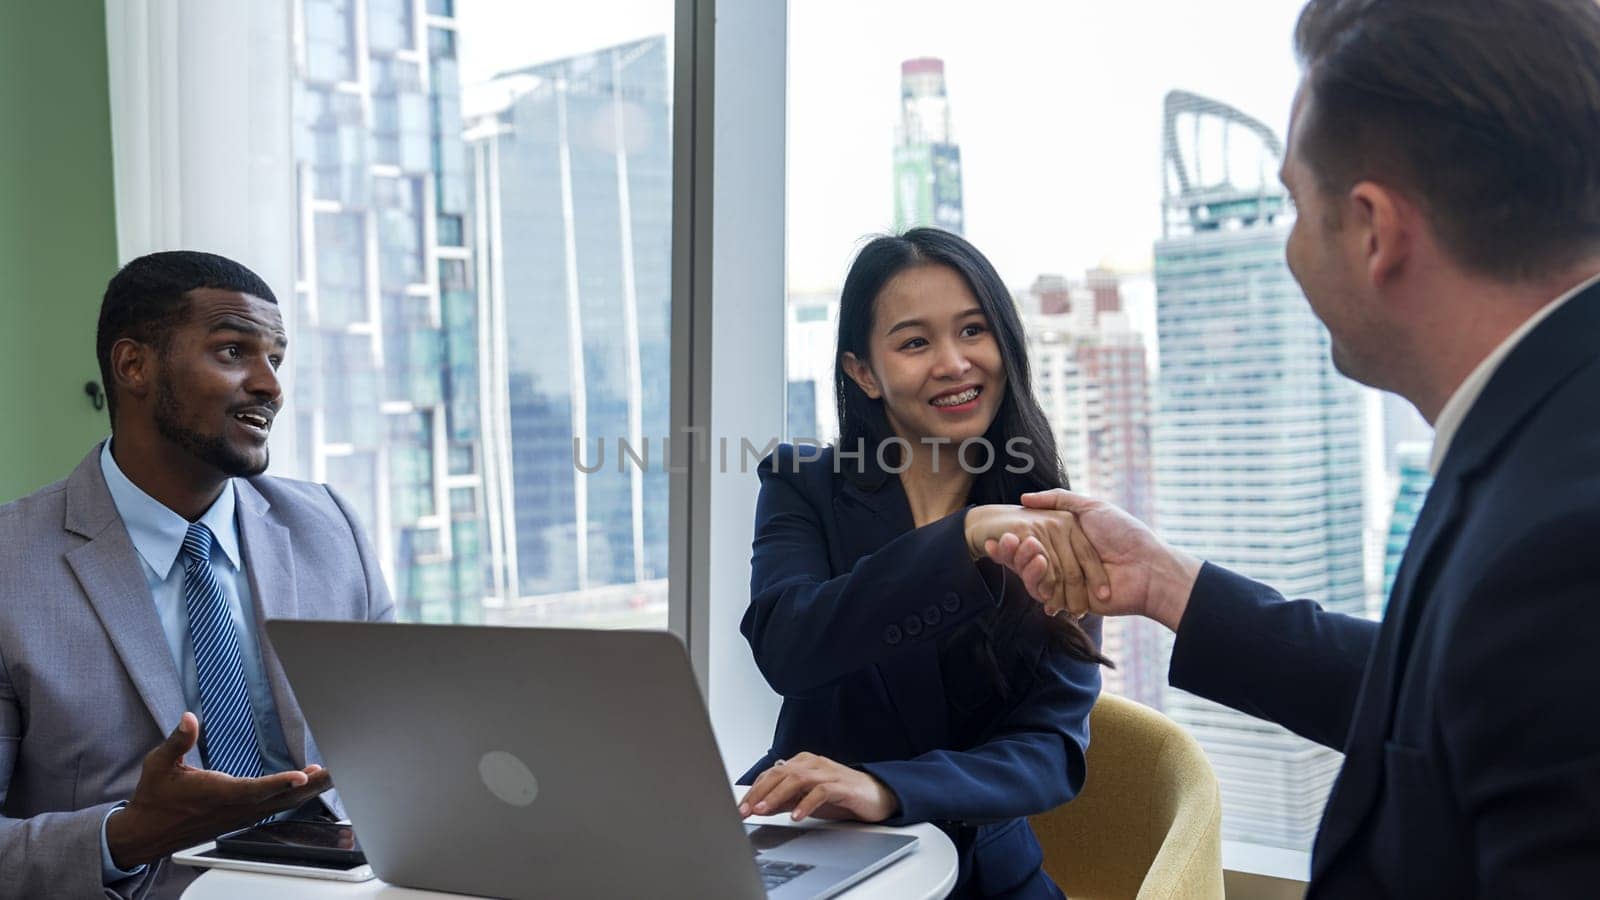 Ornament office with cityscape view, business college or corporate consultant greeting with handshake or shake hand after seal corporate agreement deal for business partnership cooperation